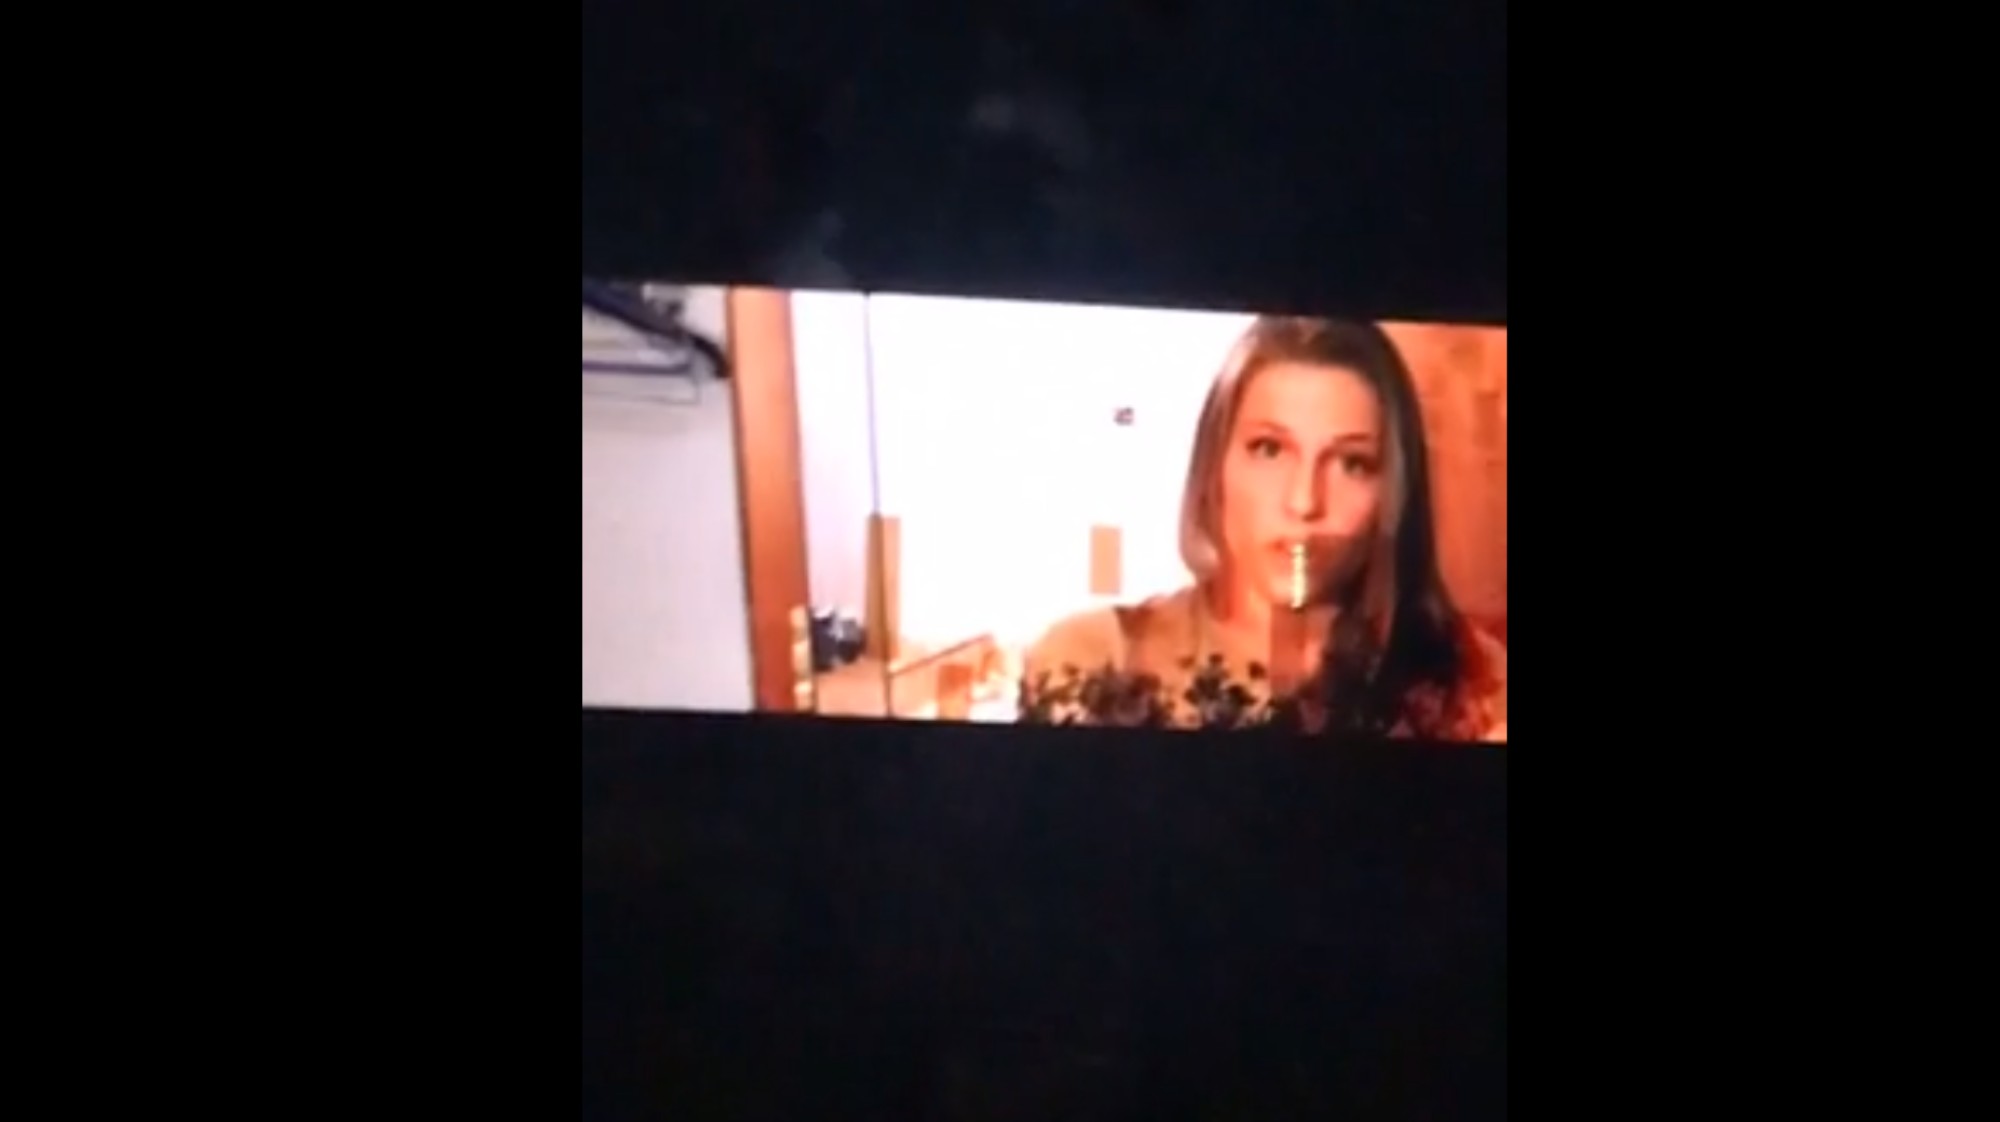 Threesome Blowjob Scene on Giant Highway Billboard Could ...